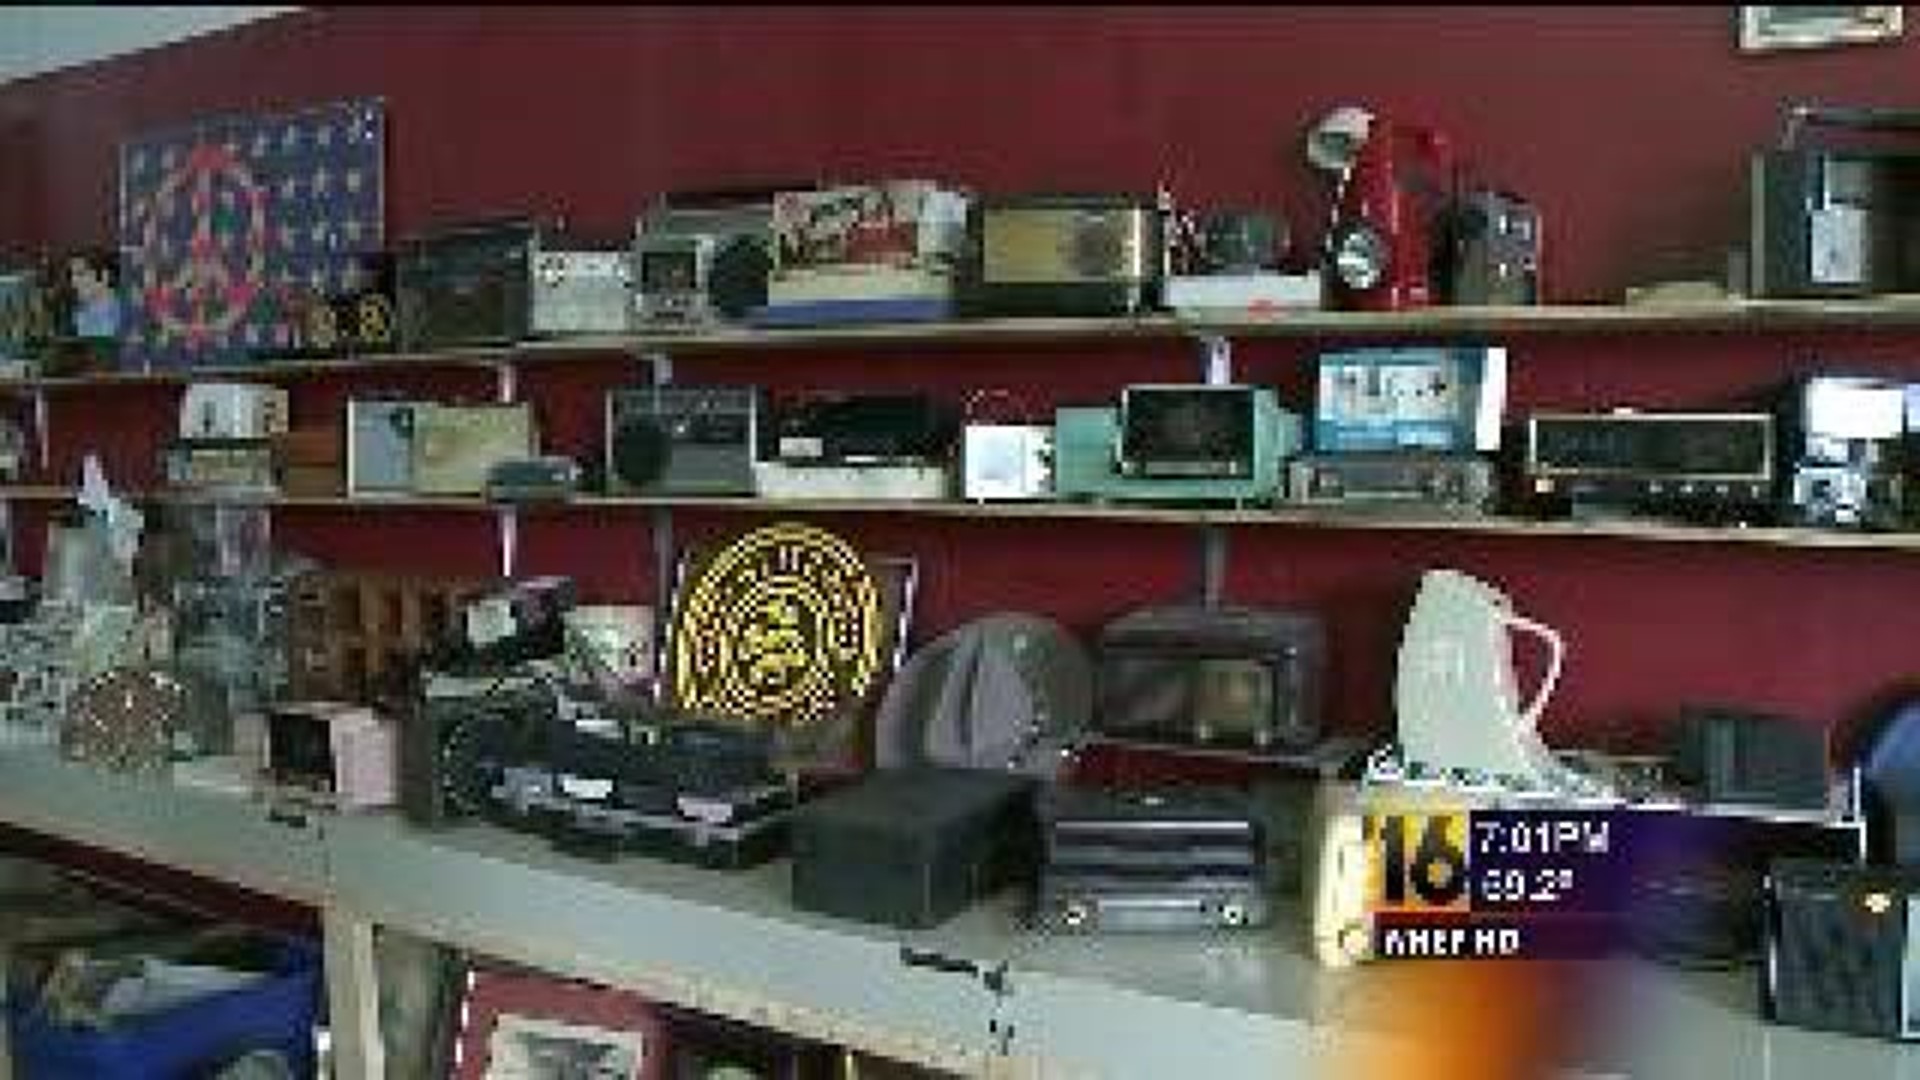 Pottsville Business May Have to Close Over Winter